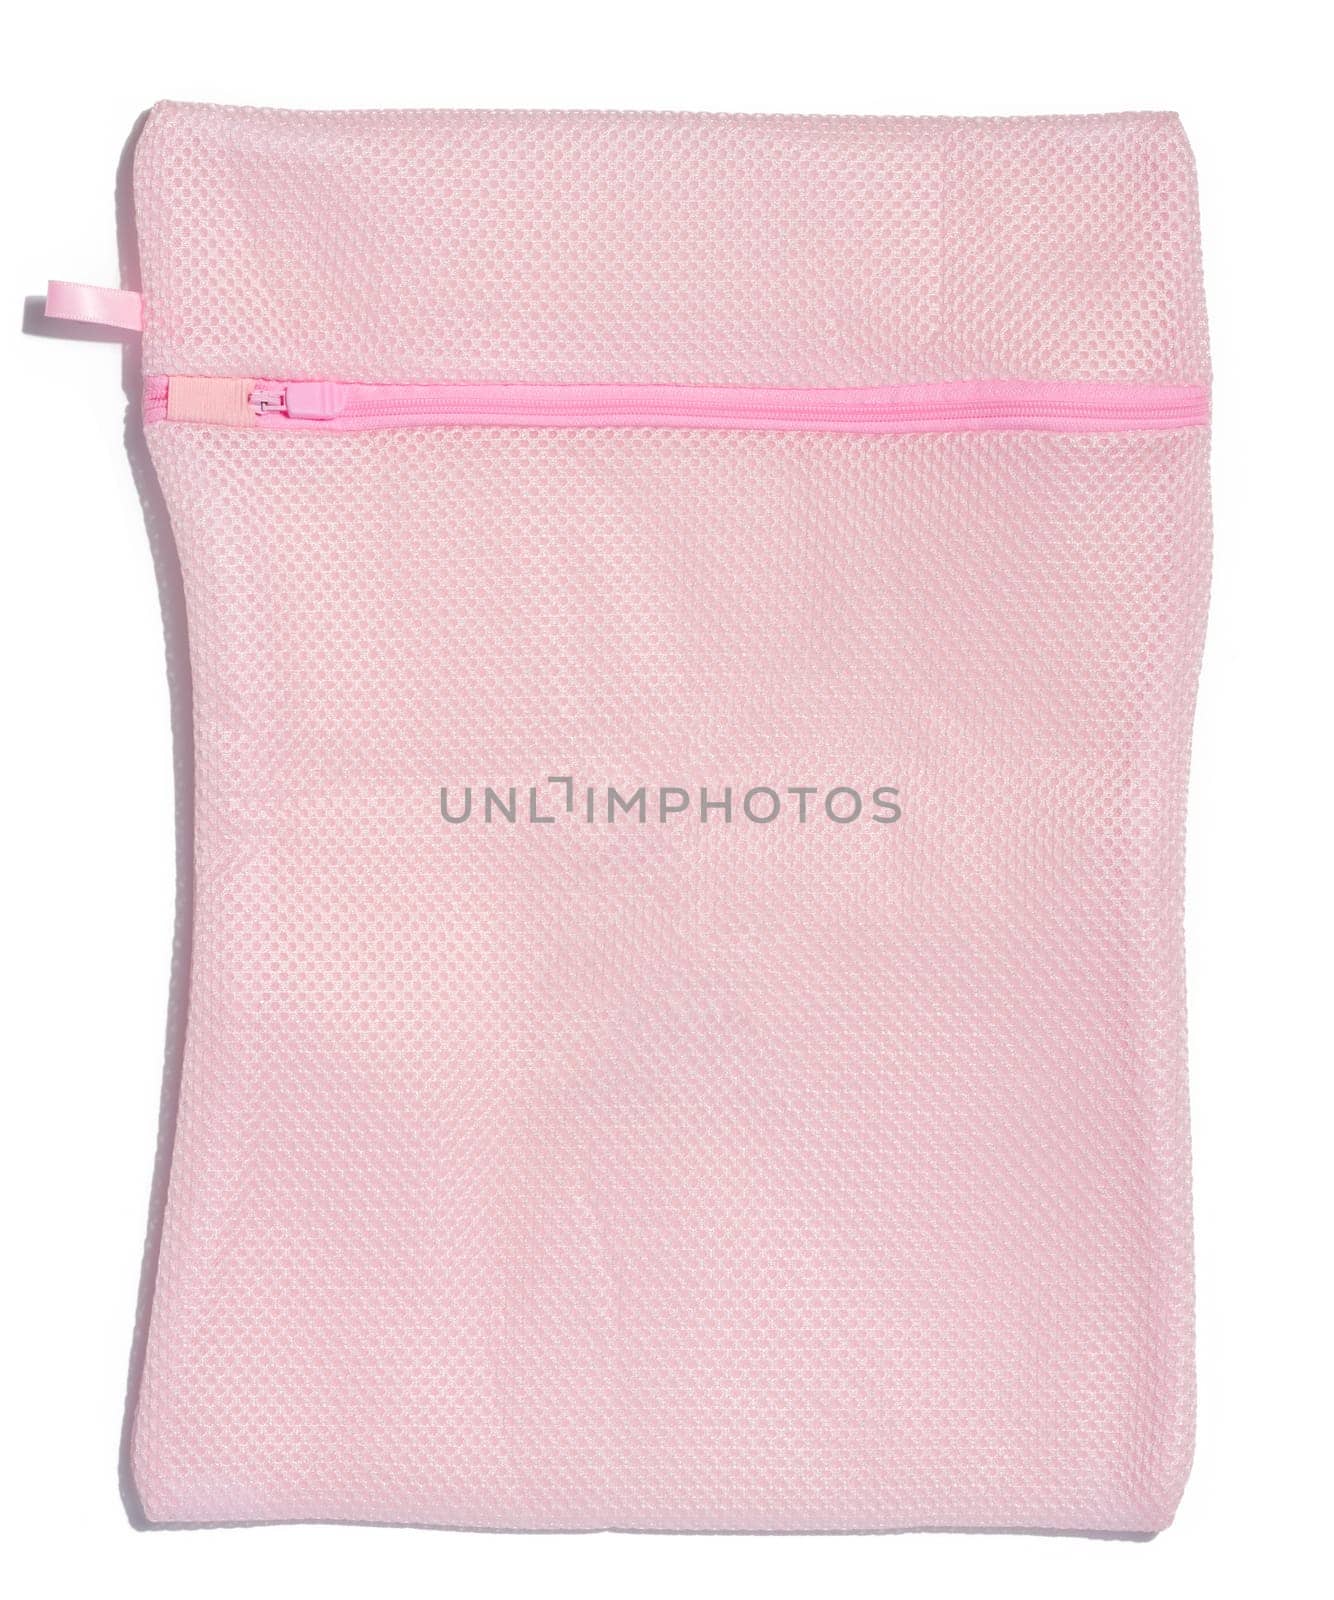 Pink bag for washing clothes in a washing machine on a white background by ndanko